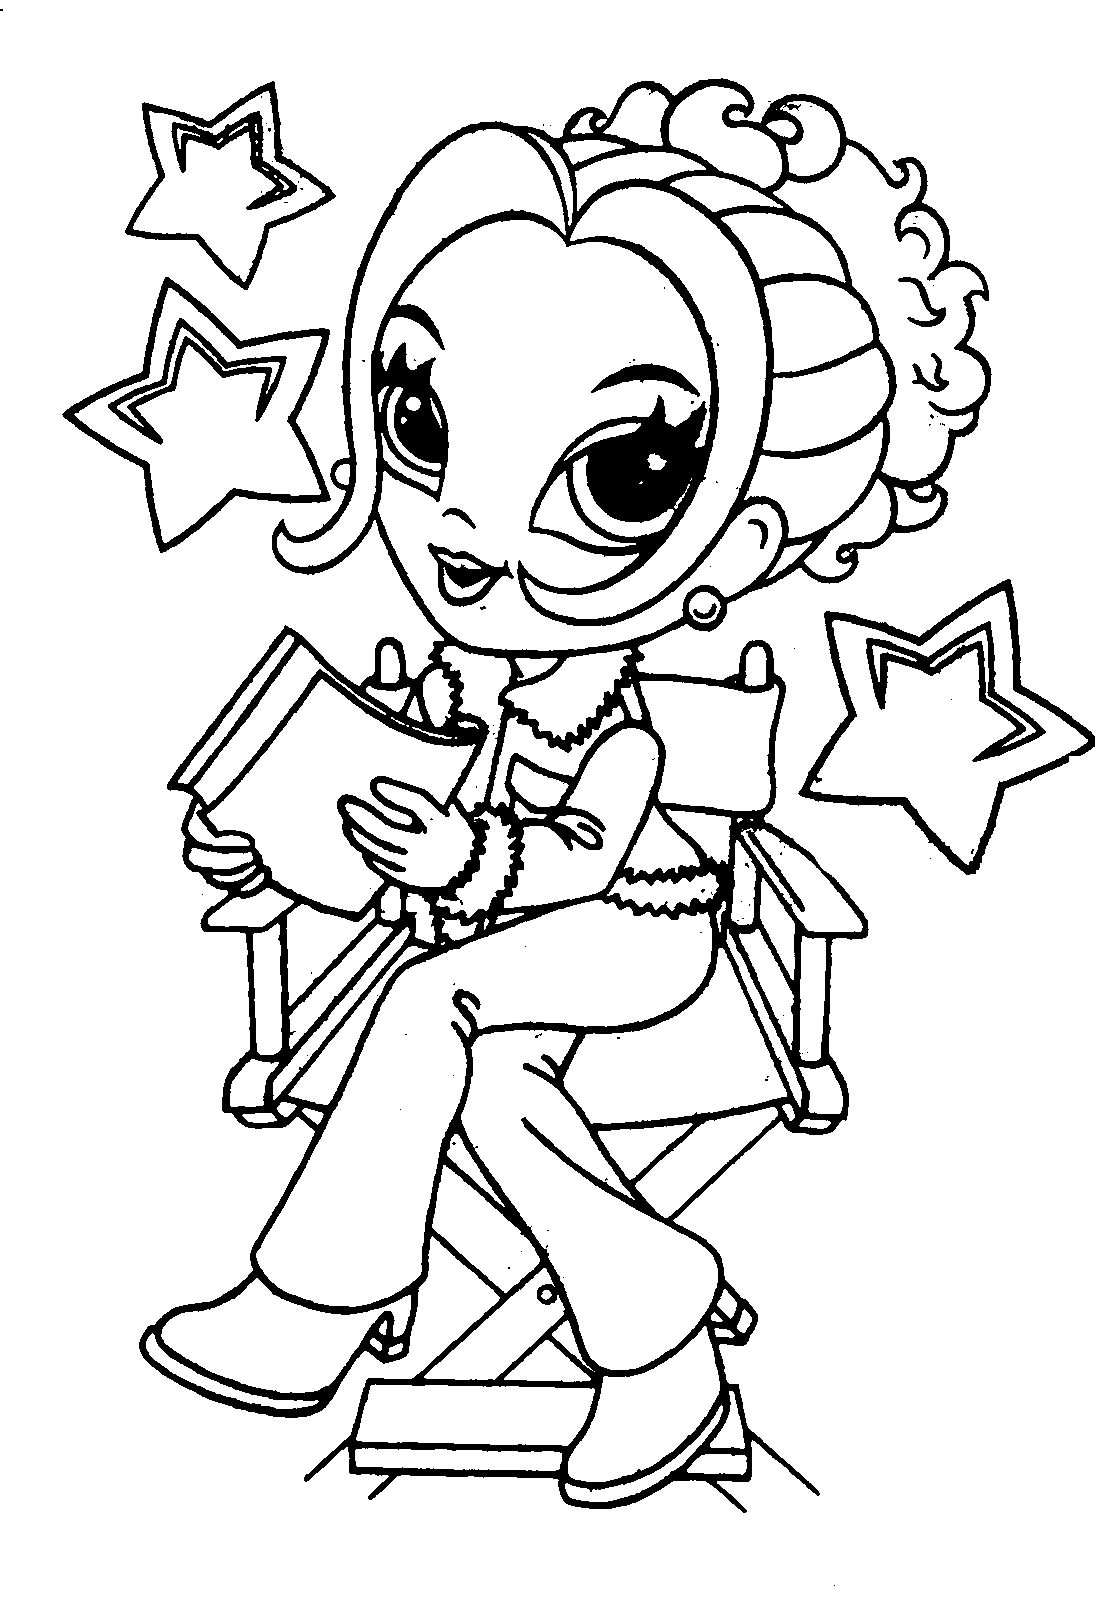 Color Coloring Pages To Print - Coloring Pages For All Ages